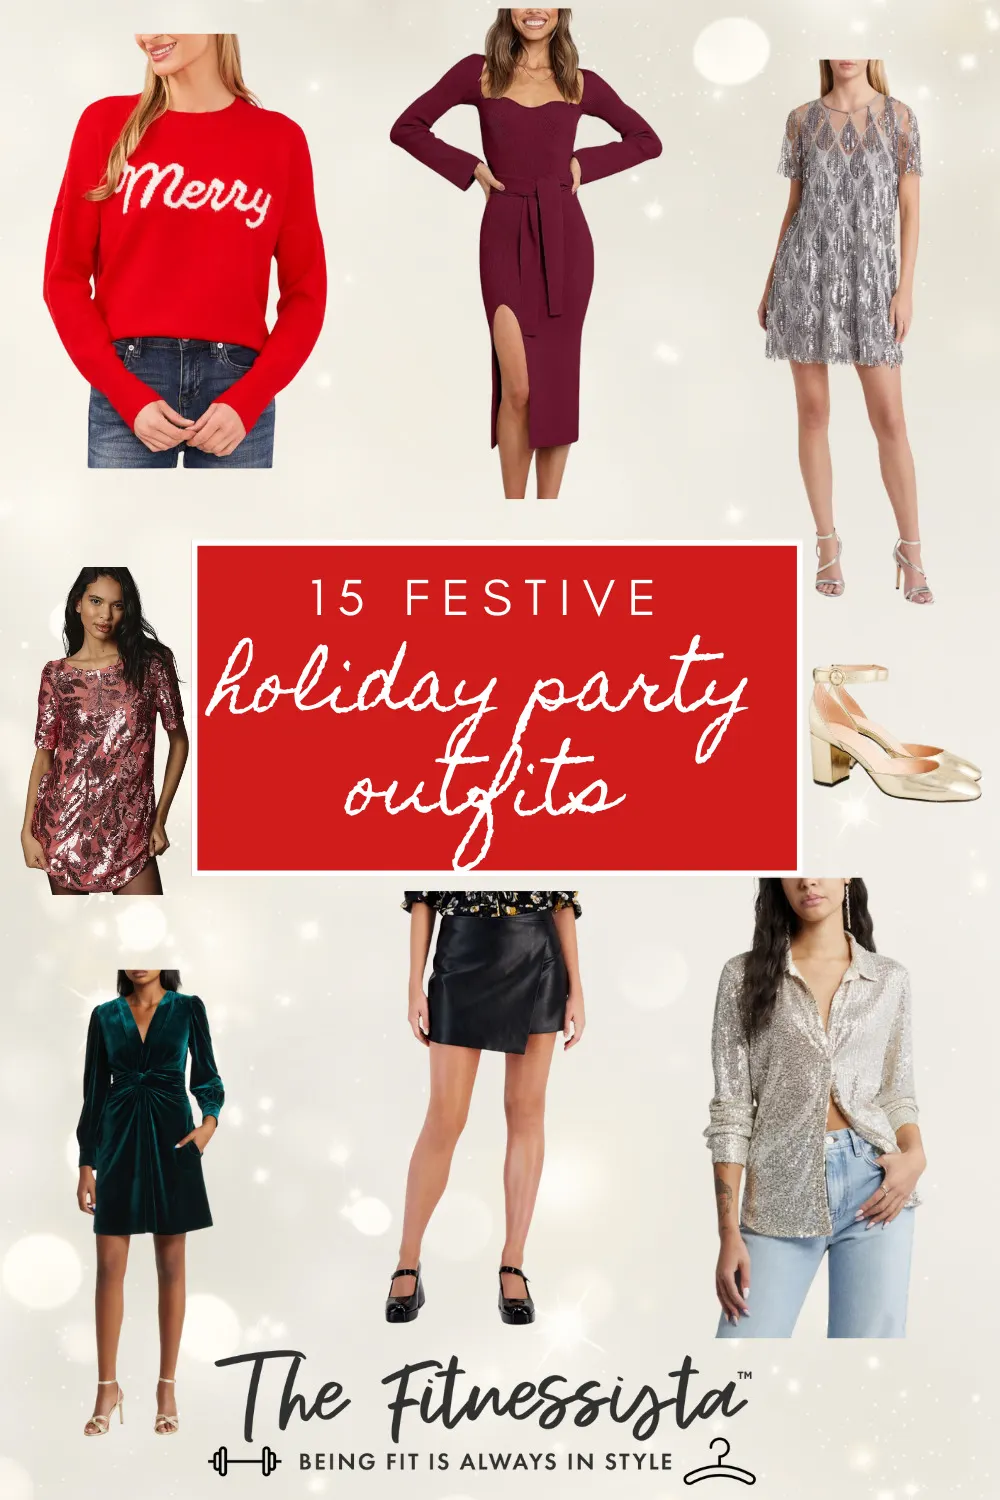 15 festive holiday party outfits - The Fitnessista